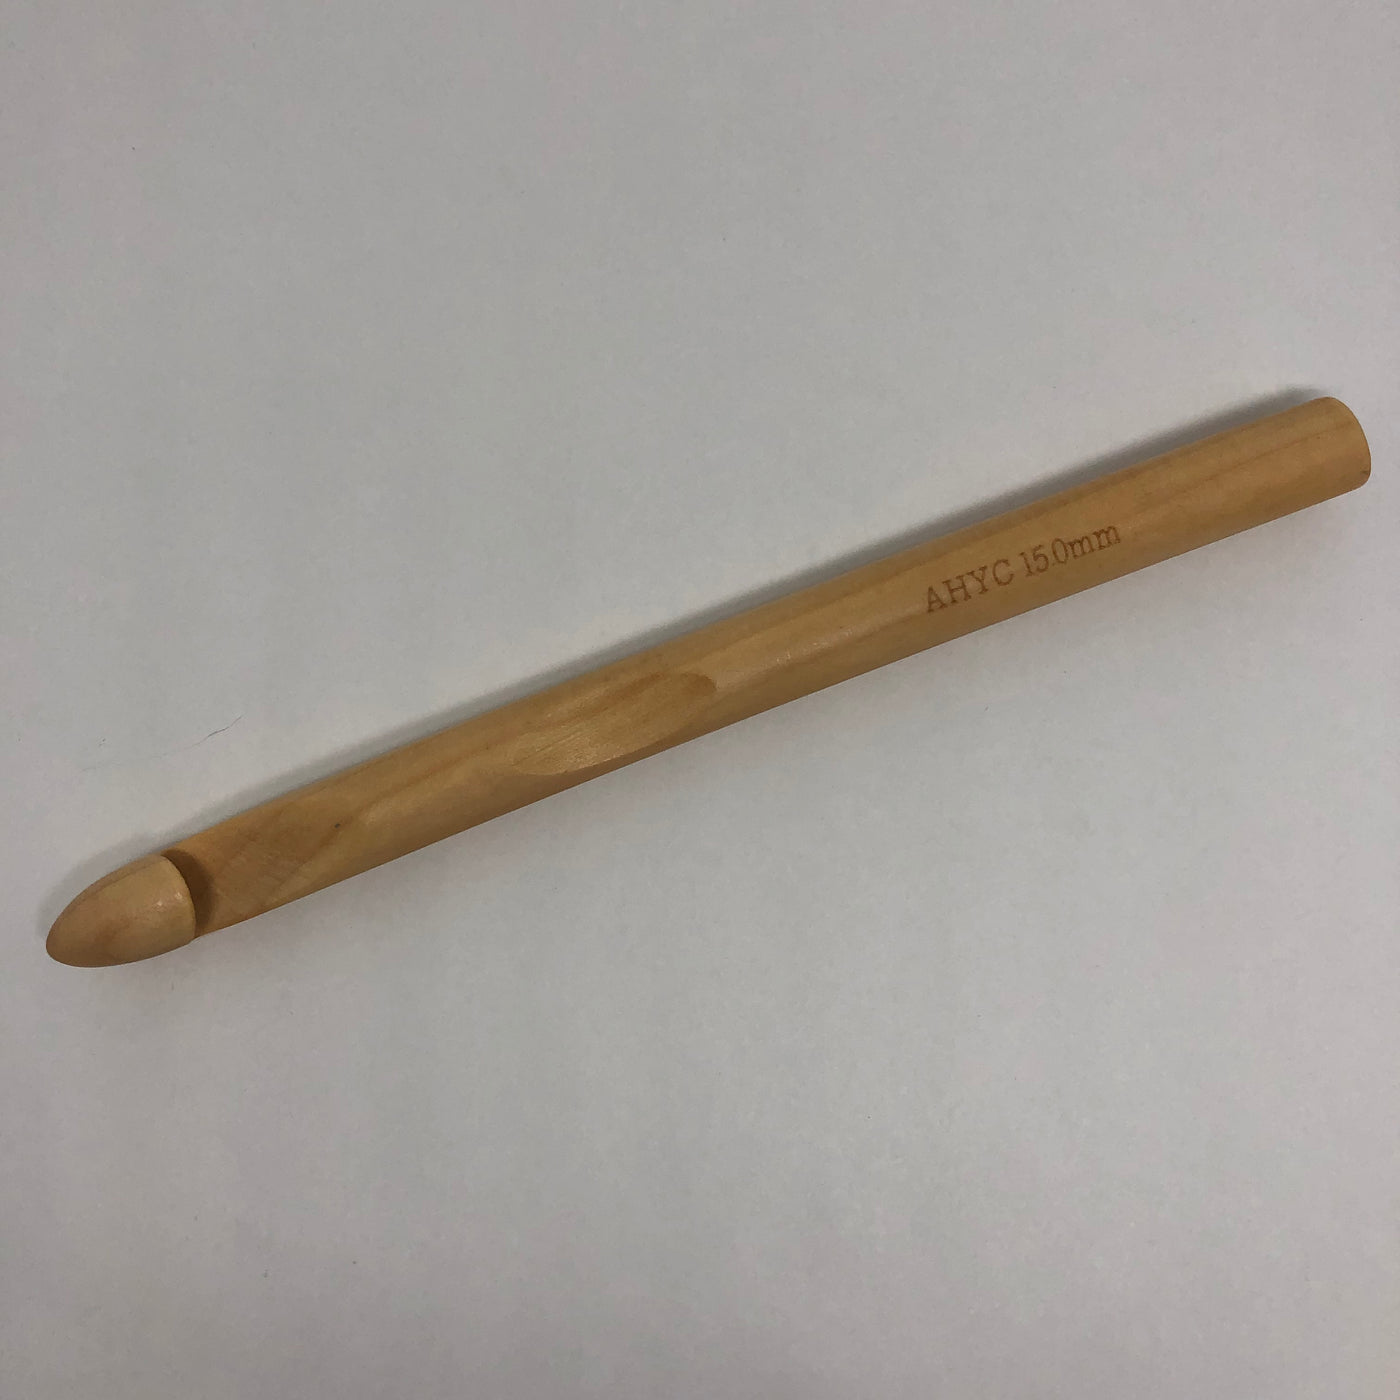 Where can I find bamboo crochet hooks 15mm